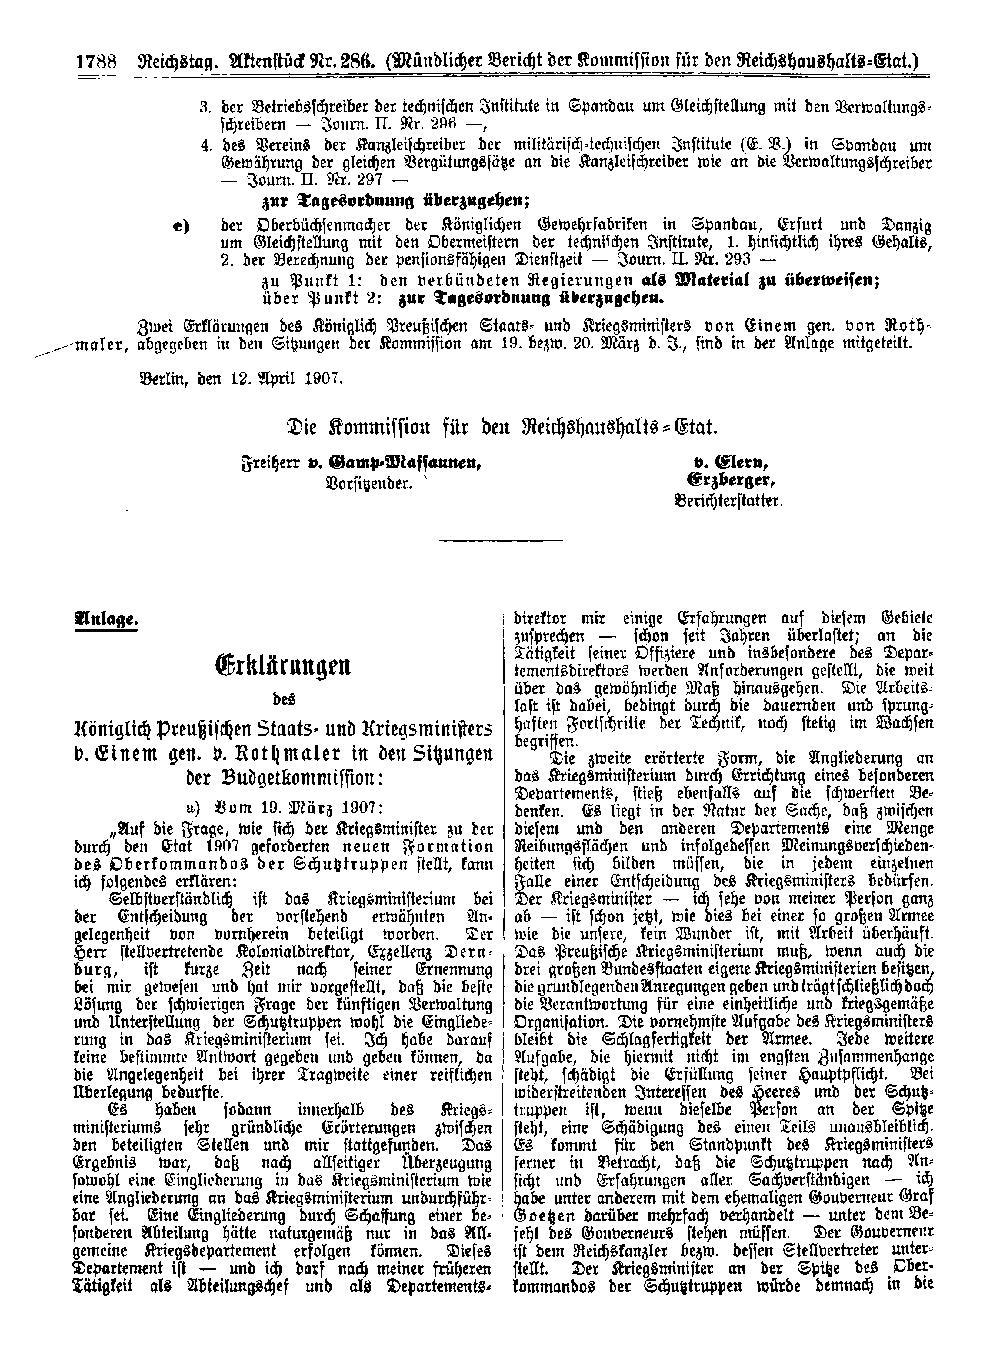 Scan of page 1788